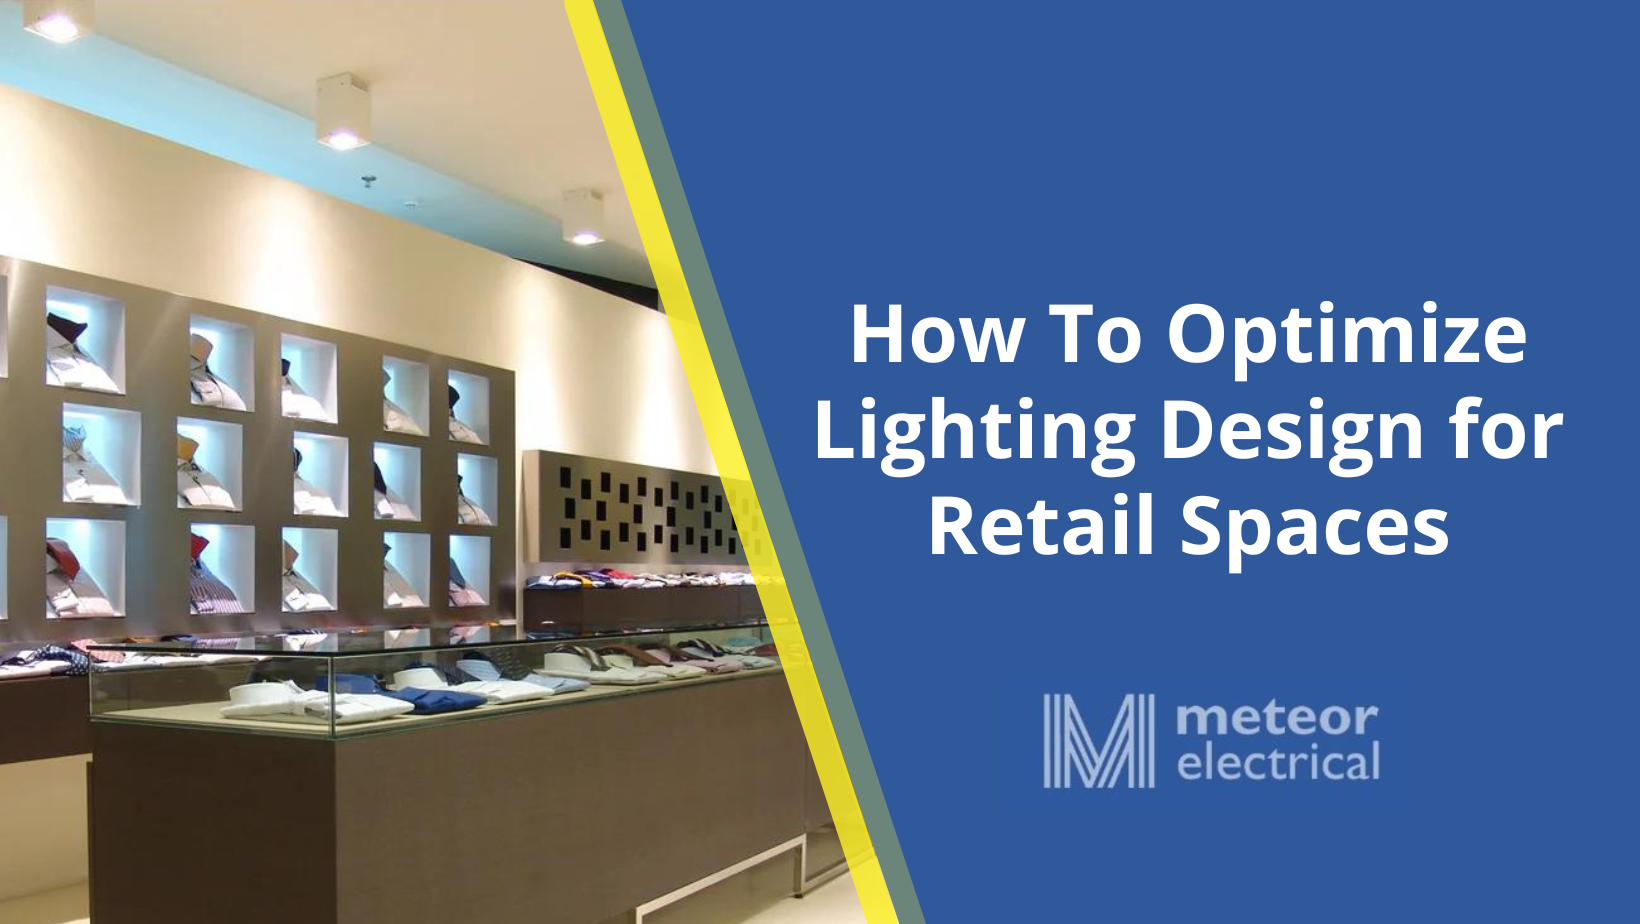 How To Optimize Lighting Design for Retail Spaces